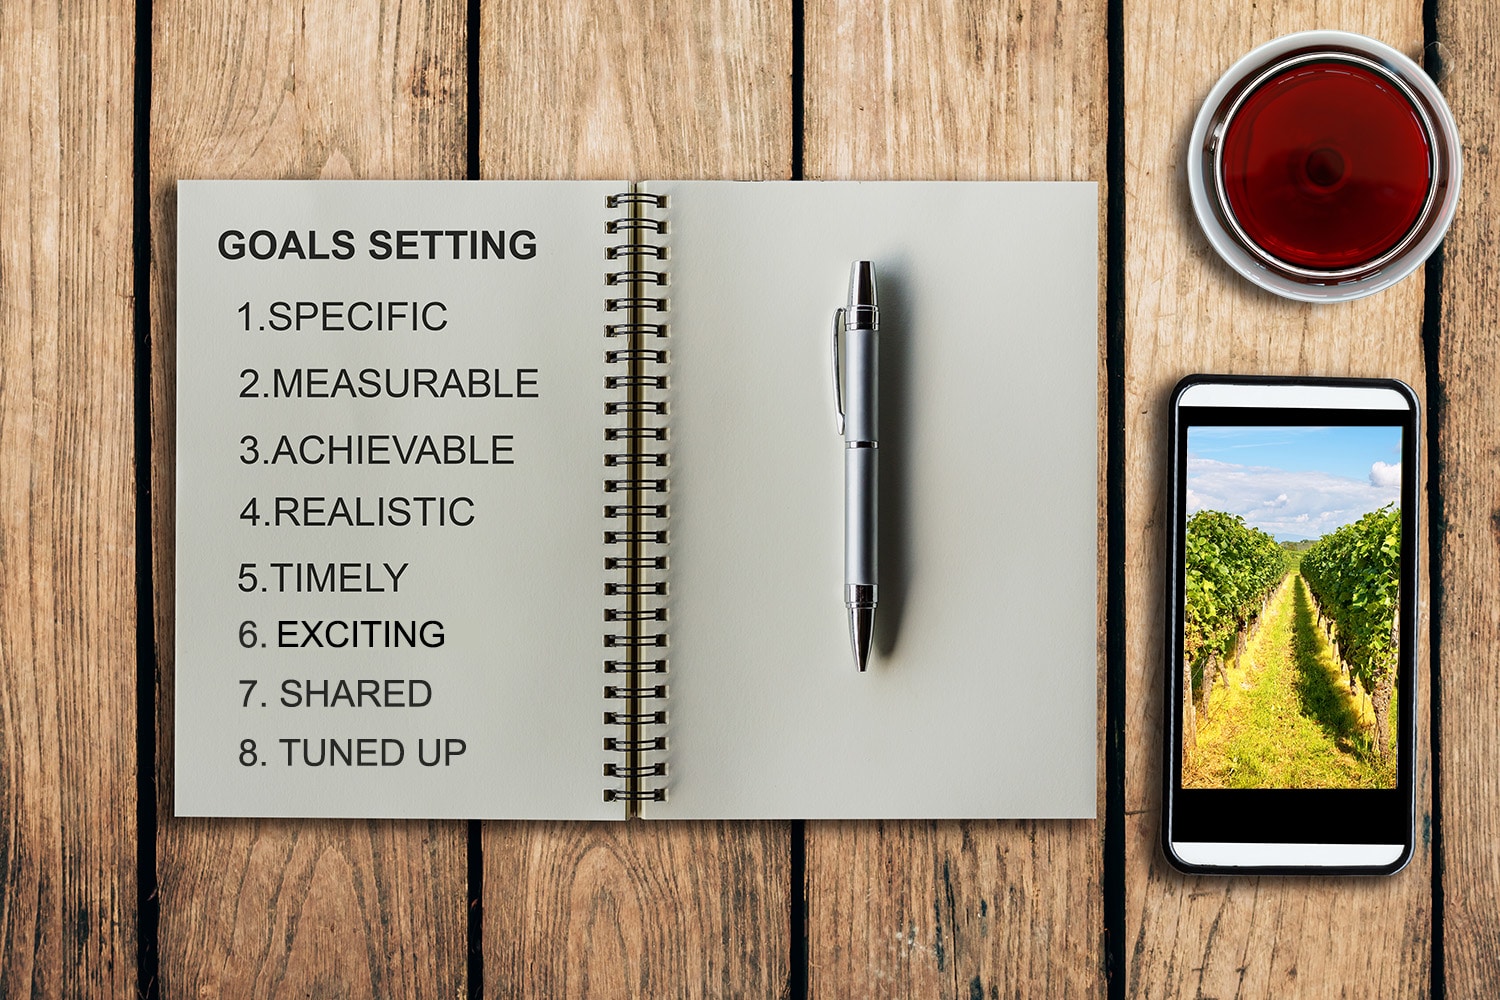 SMARTEST Goal - Goal Setting - Specific, Measurable, Achievable, Realistic, Timely, Exciting, Shared, Tuned Up